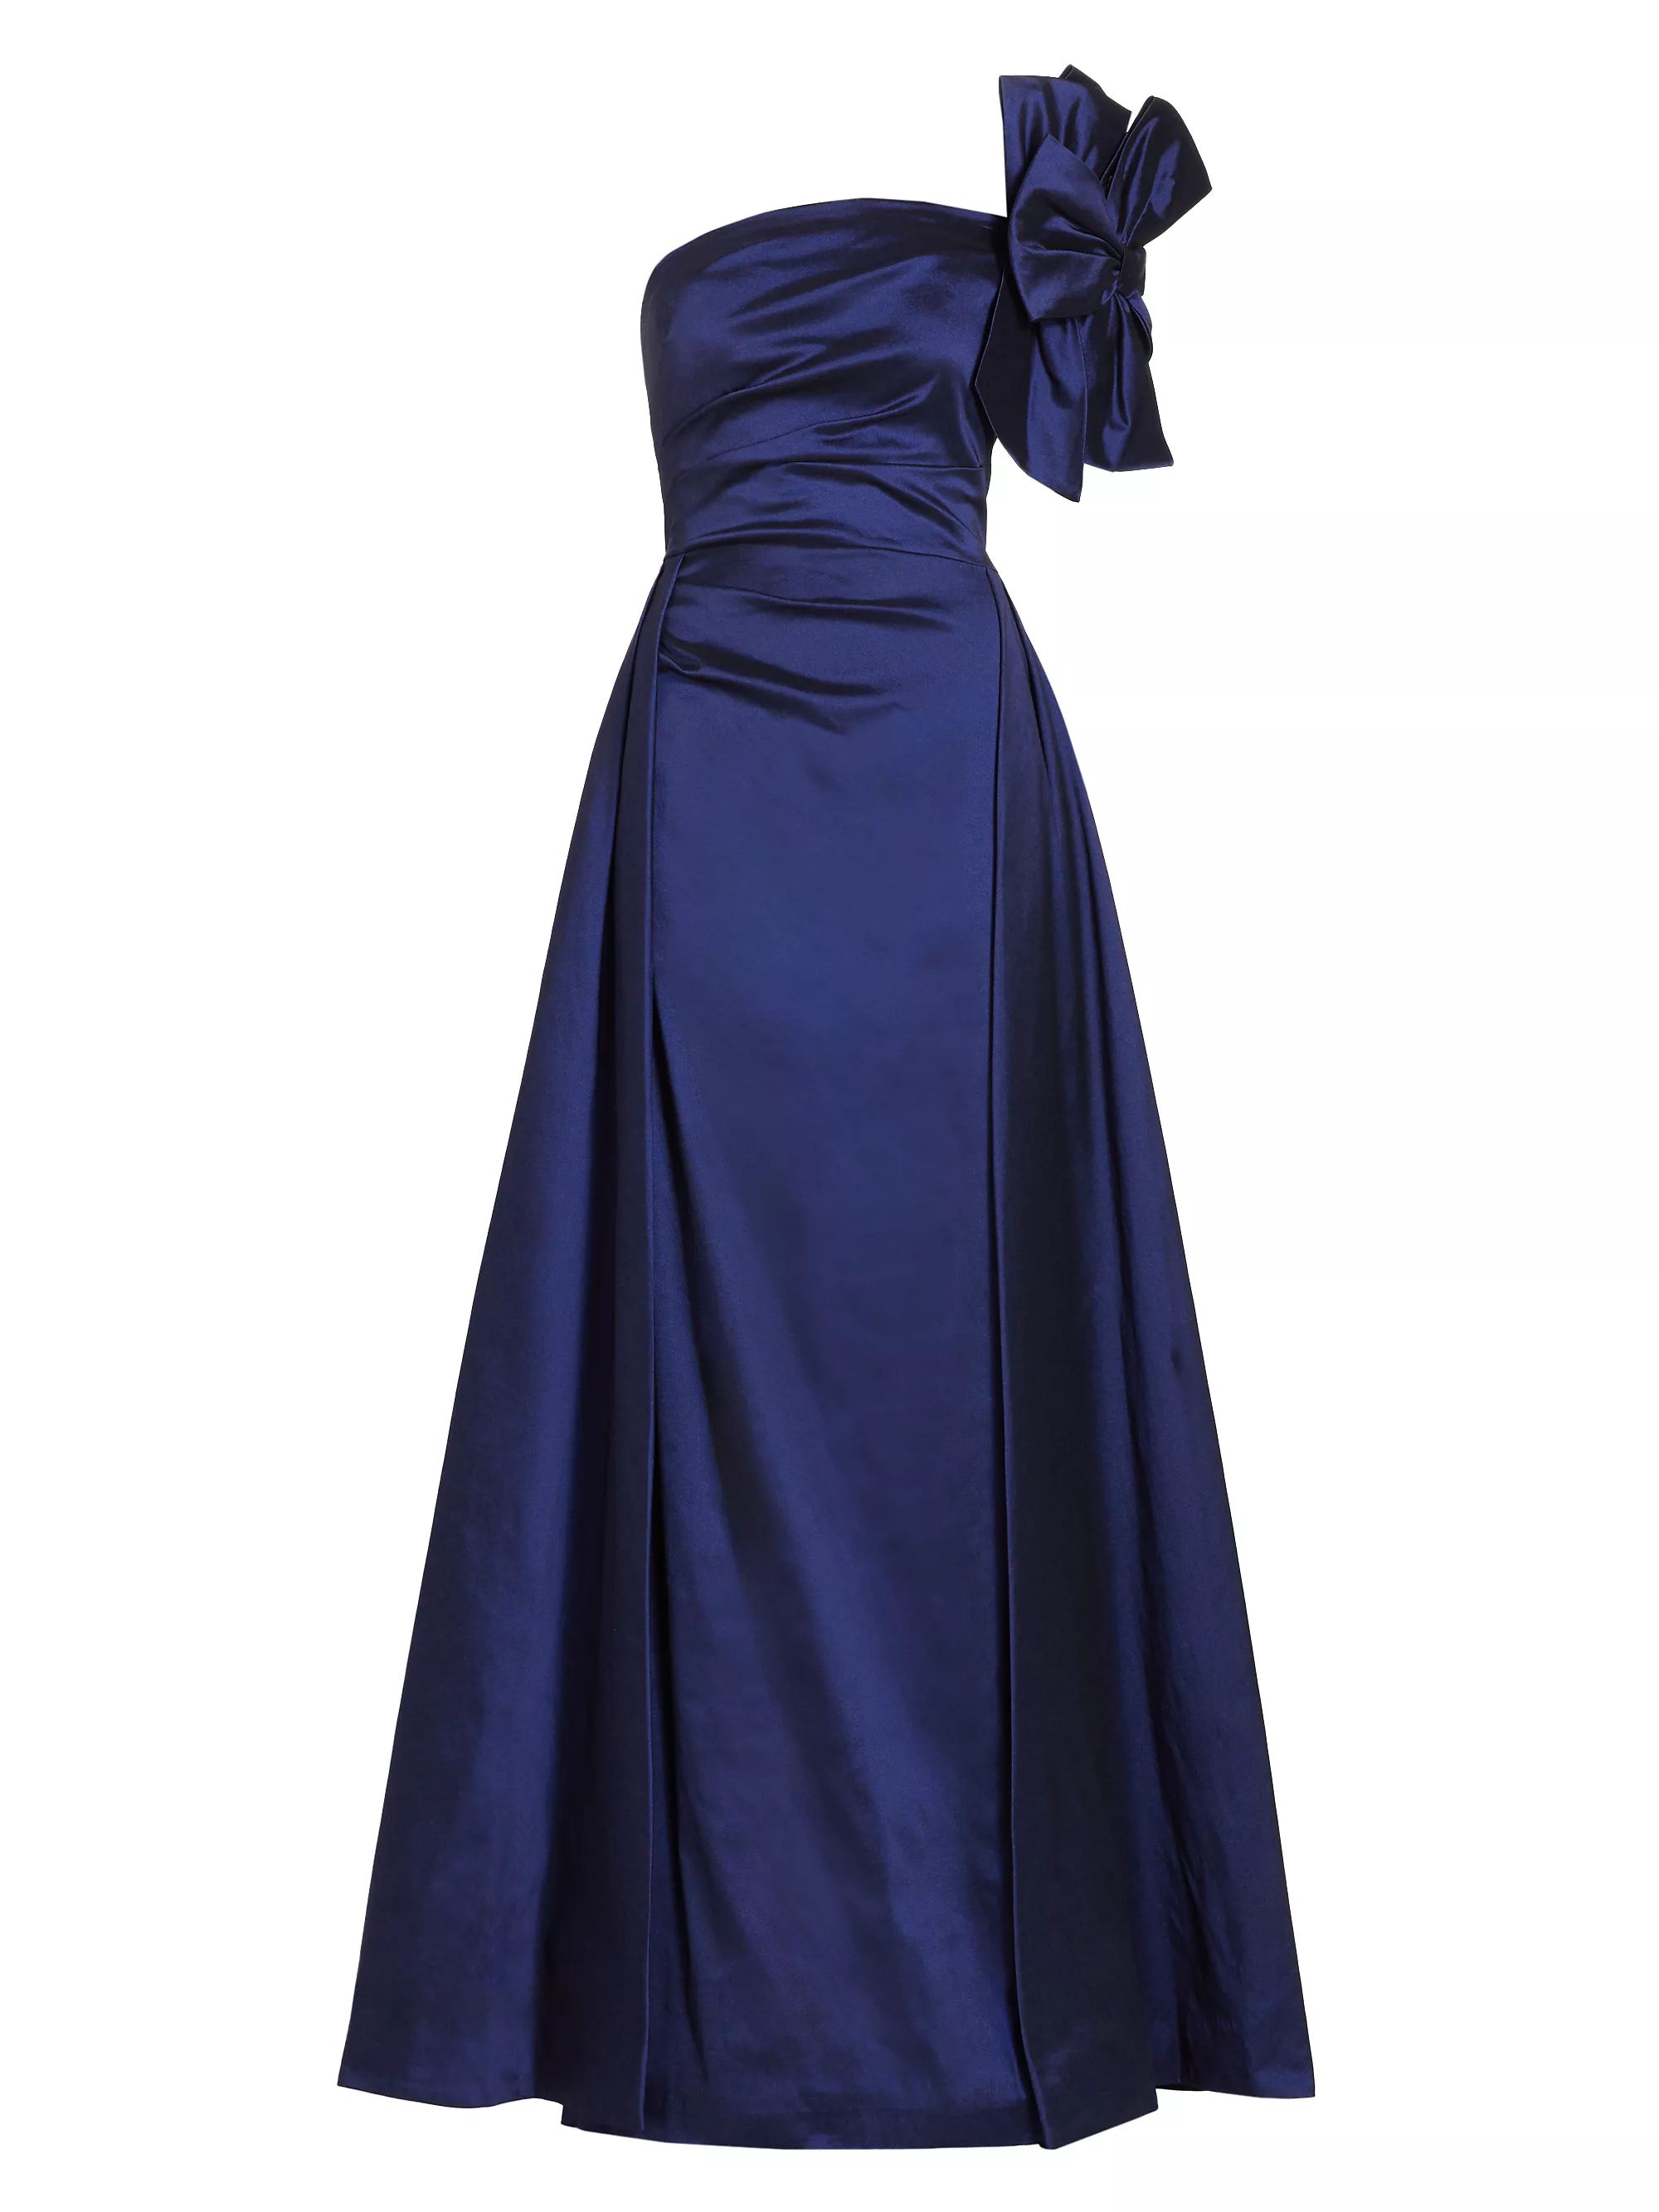 SapphireAll Evening GownsTeri Jon by Rickie FreemanAsymmetric Bow-Embellished Satin Gown$990SELEC... | Saks Fifth Avenue